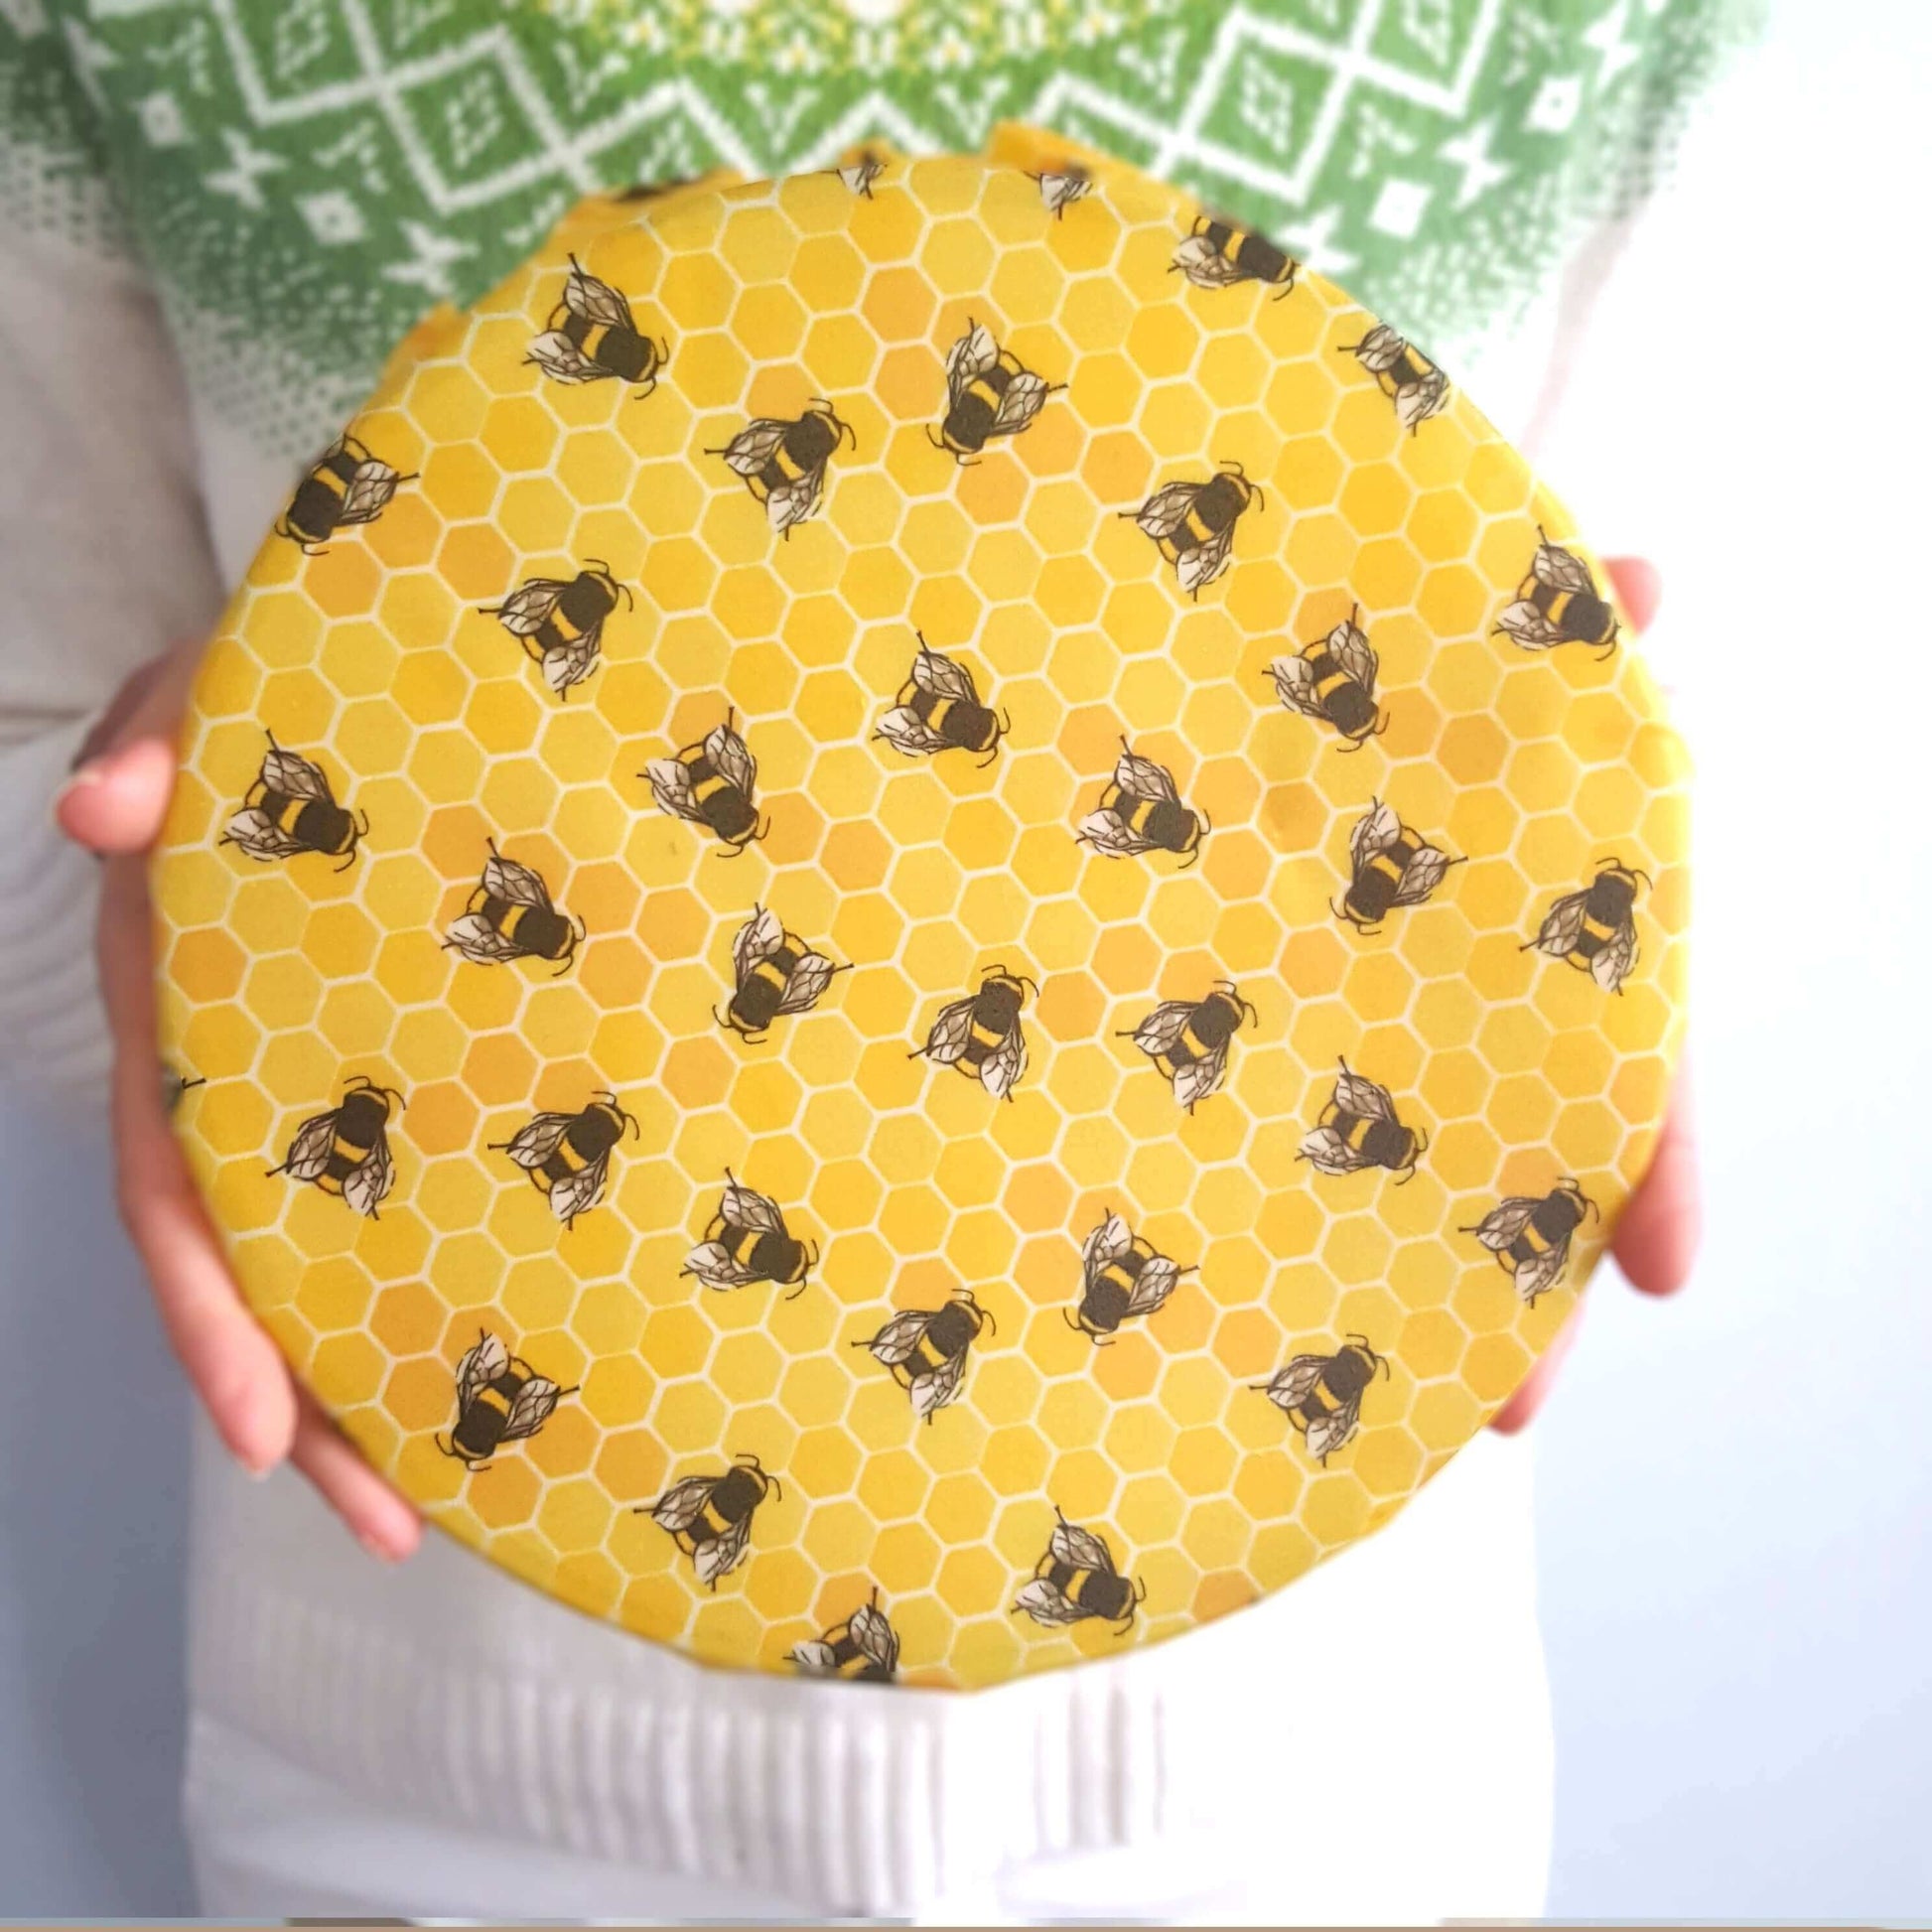 Reusable Beeswax Food Wraps 100% Hand Made in the UK by Honey Bee Good. Earth Kind Classic set of 3 in Yellow Bees on bowl